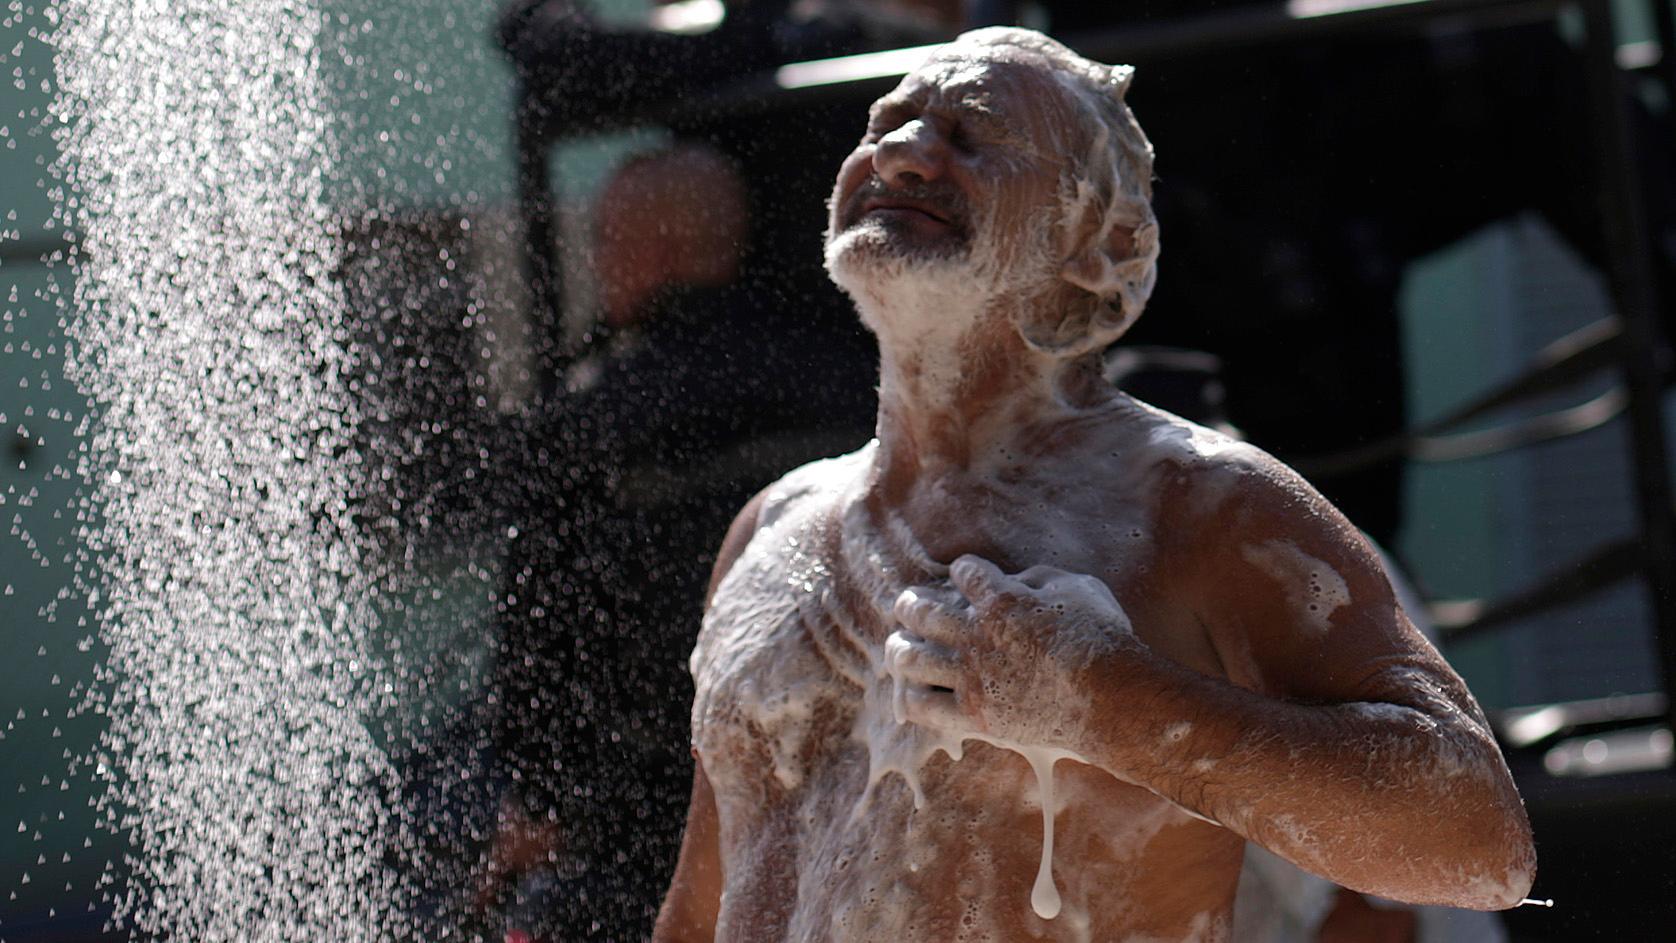 A man takes a shower as policemen patrol during an operation in Rio de Janeiro's Mare slums complex on March 30, 2014.